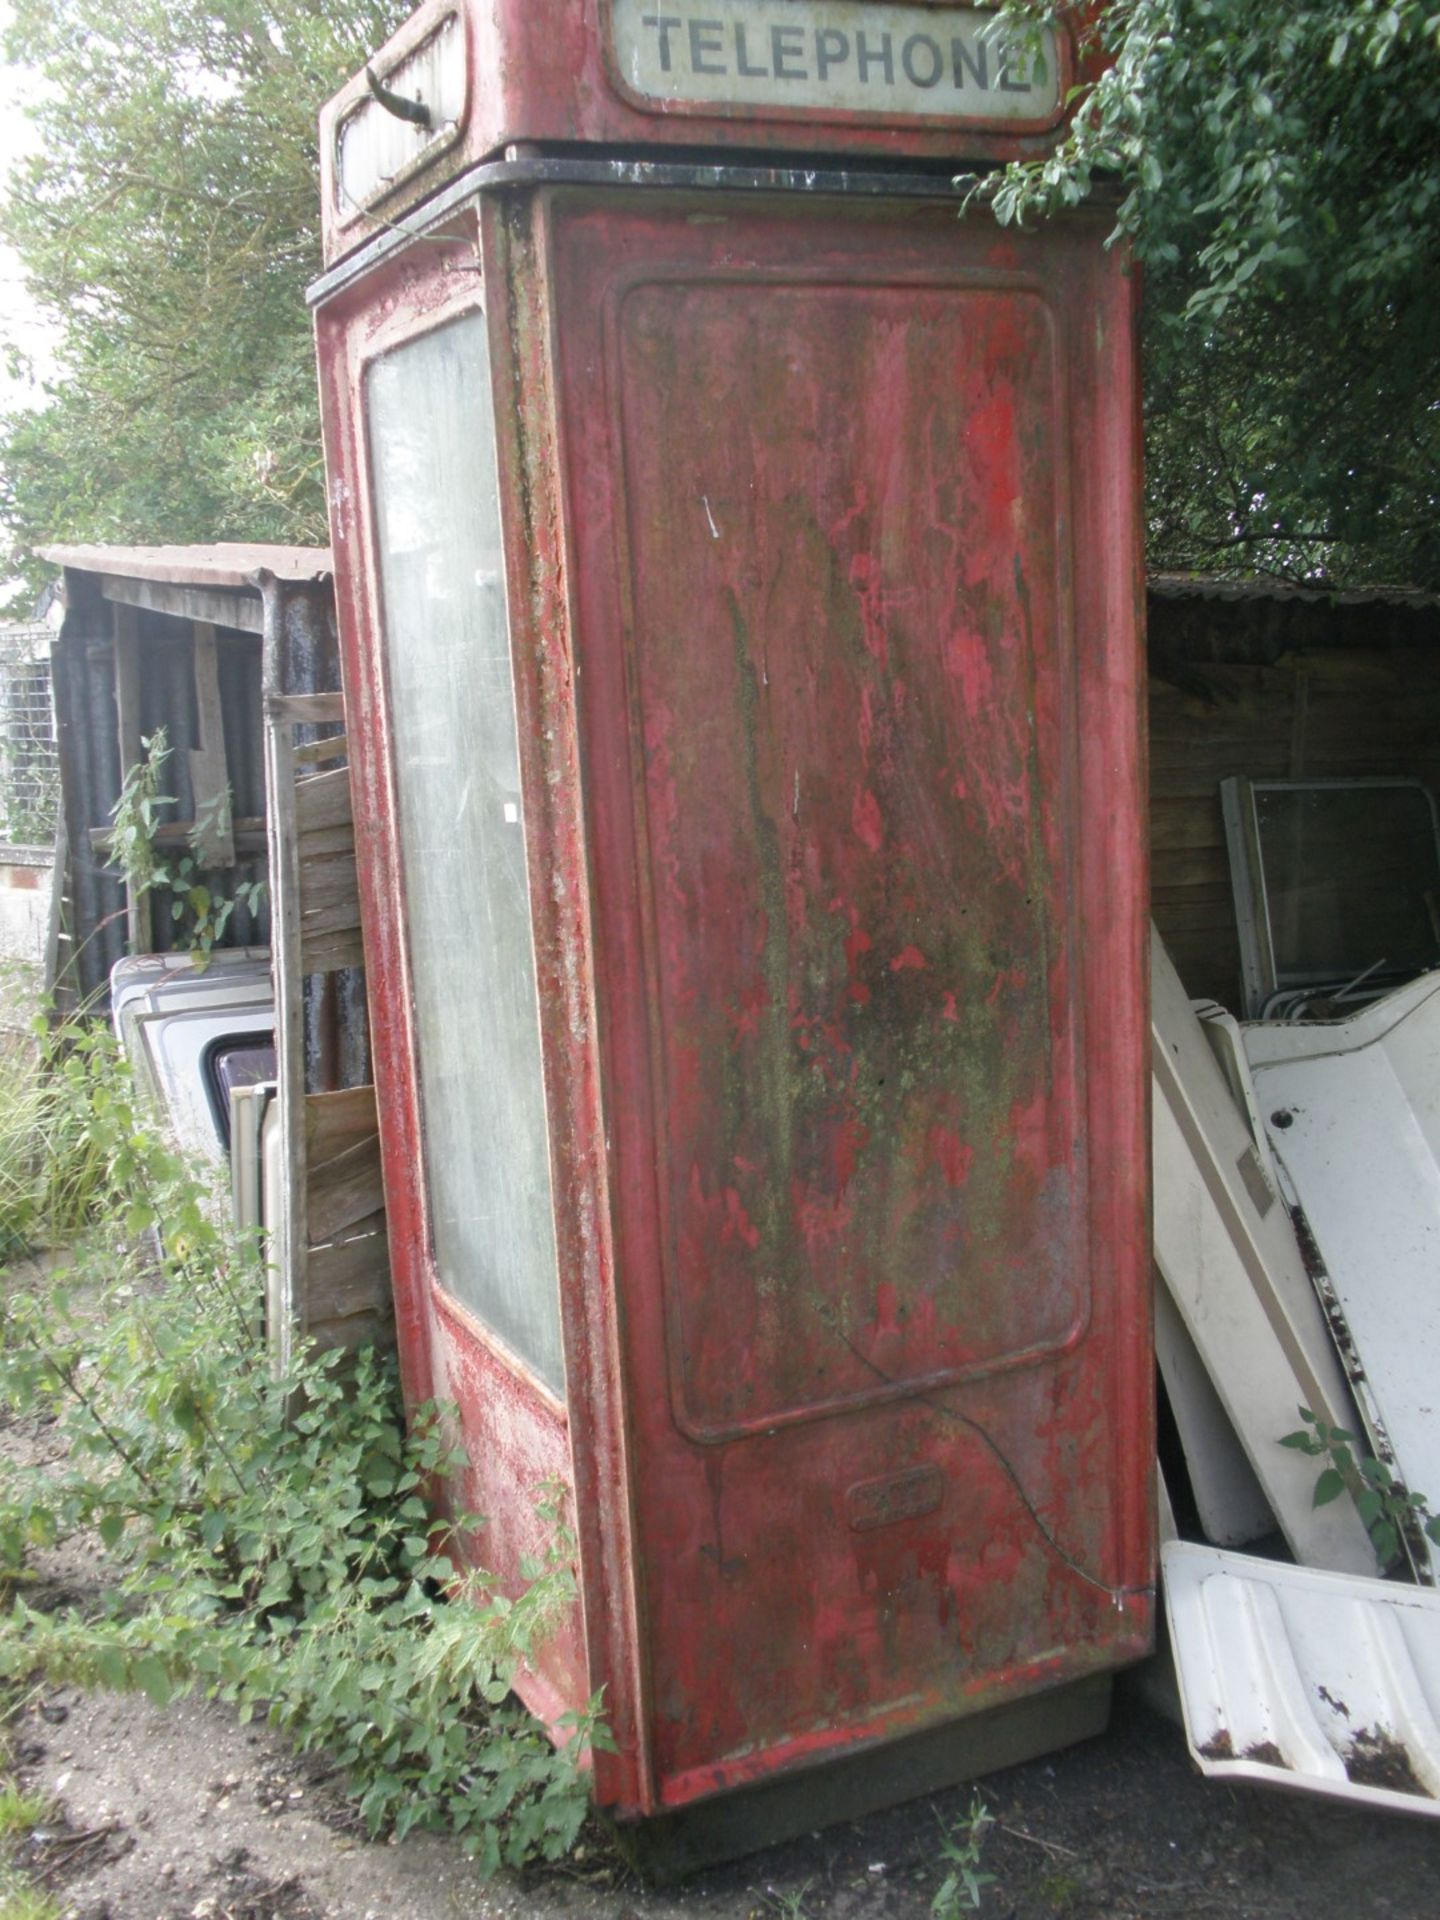 A Lion Foundry red telephone box. (AF) - Image 2 of 2